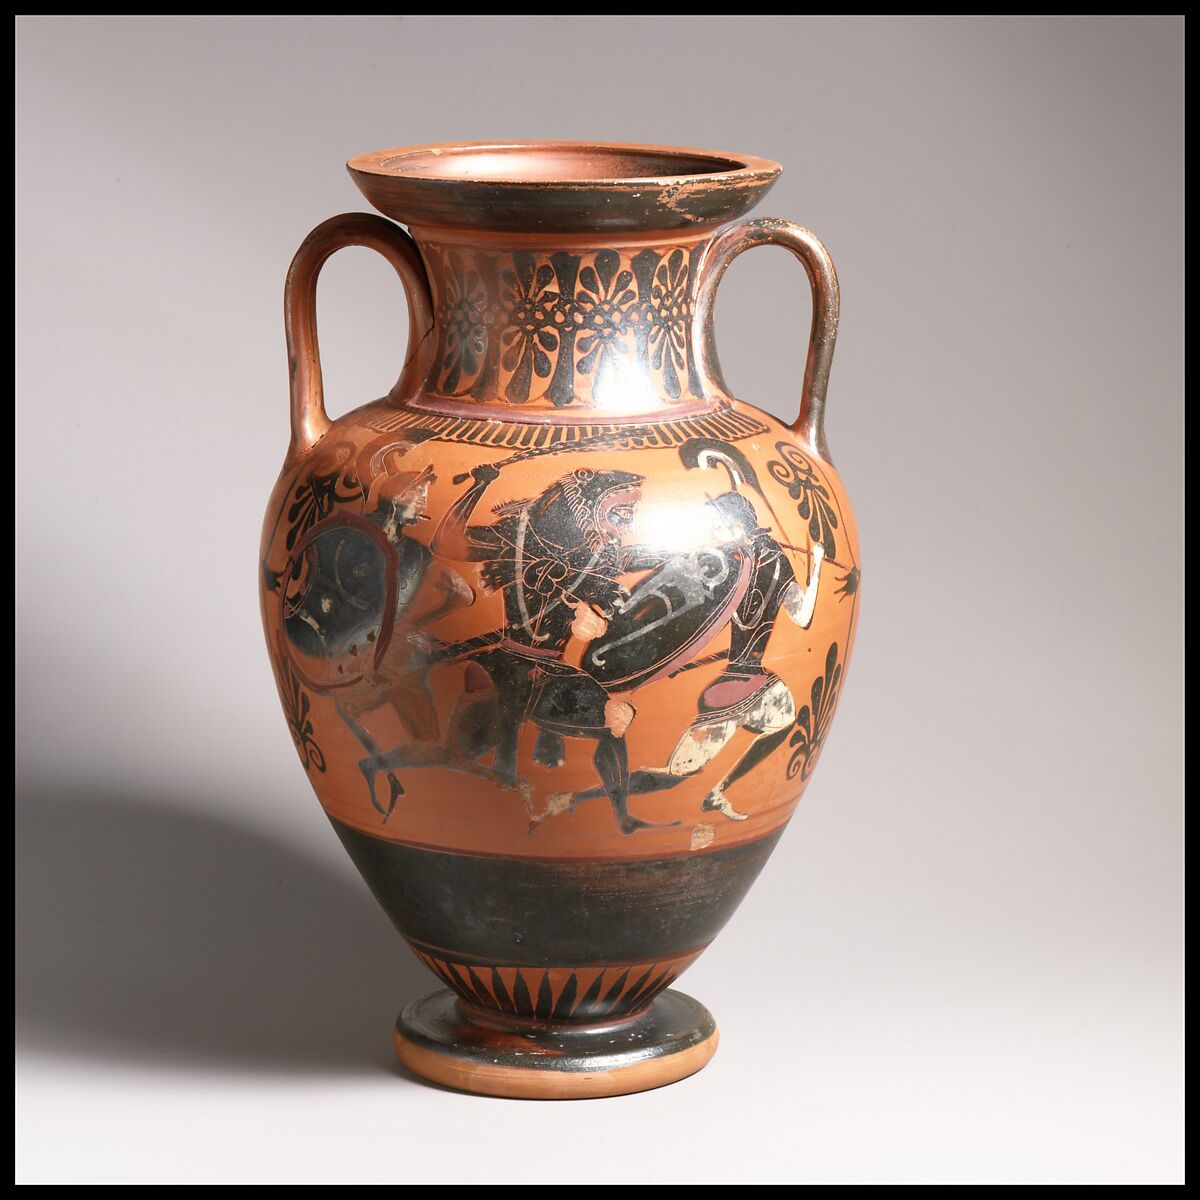 Neck-amphora, Related to the Painter of Toronto 313, Terracotta, Greek, Attic 